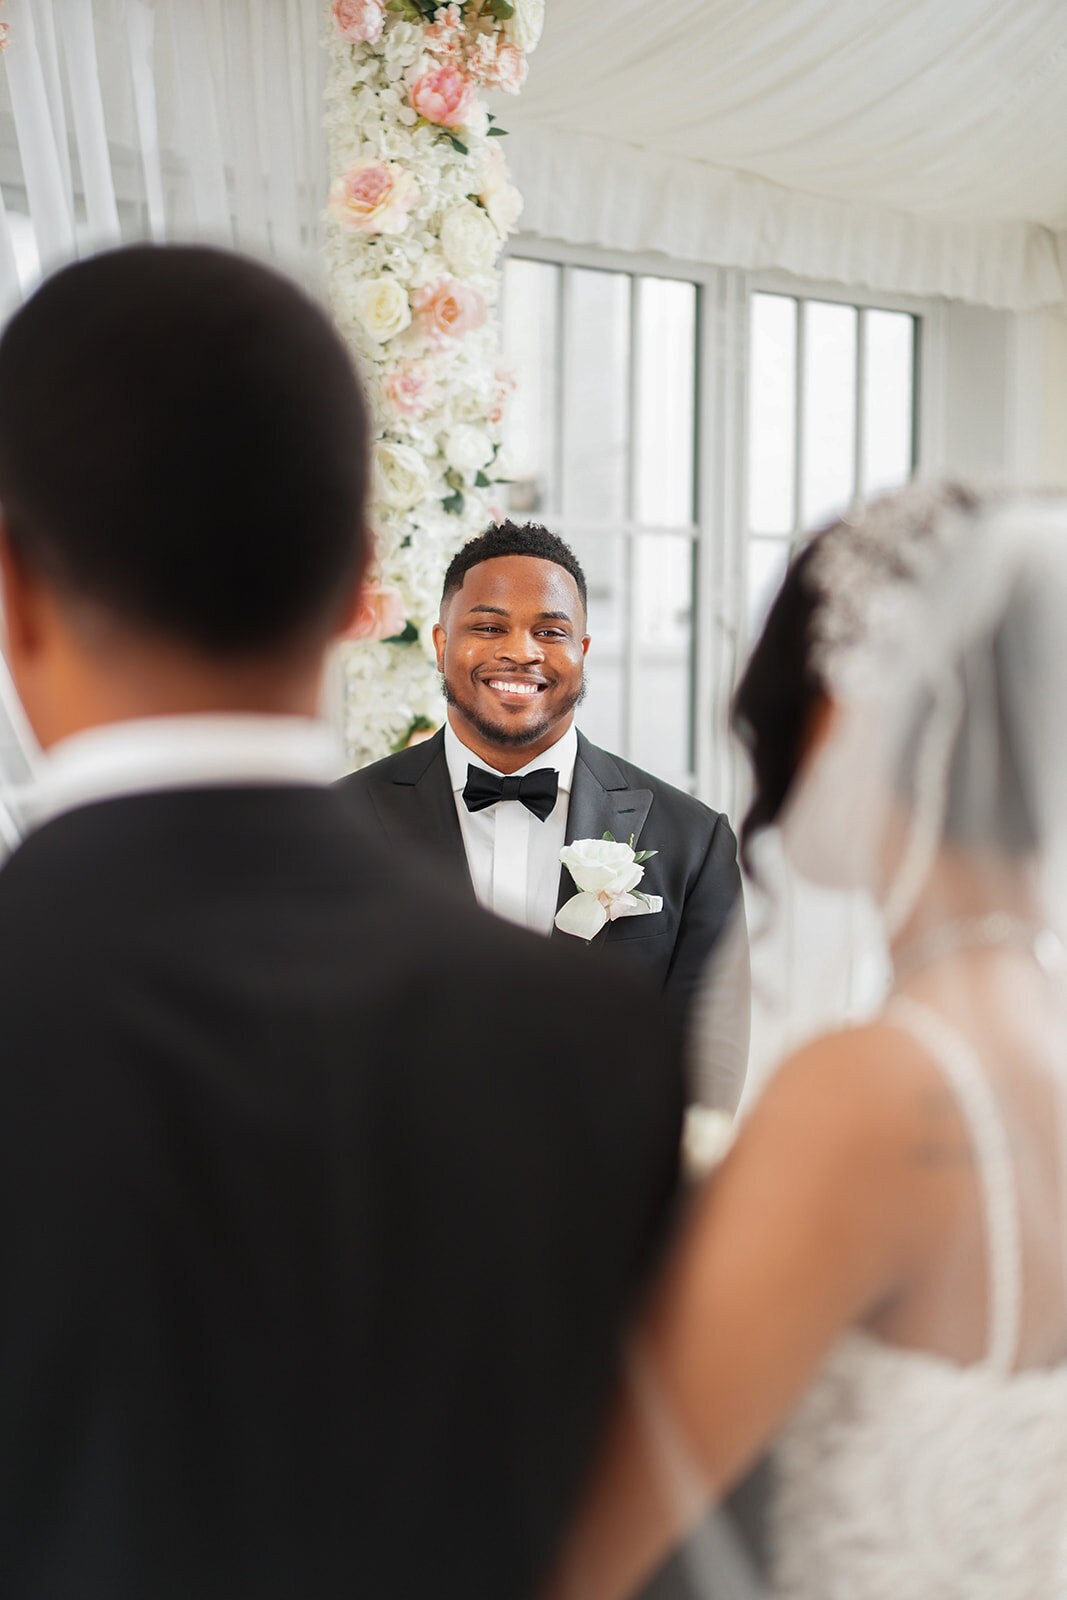 Groom smiling as bride walks down the aisle with her father